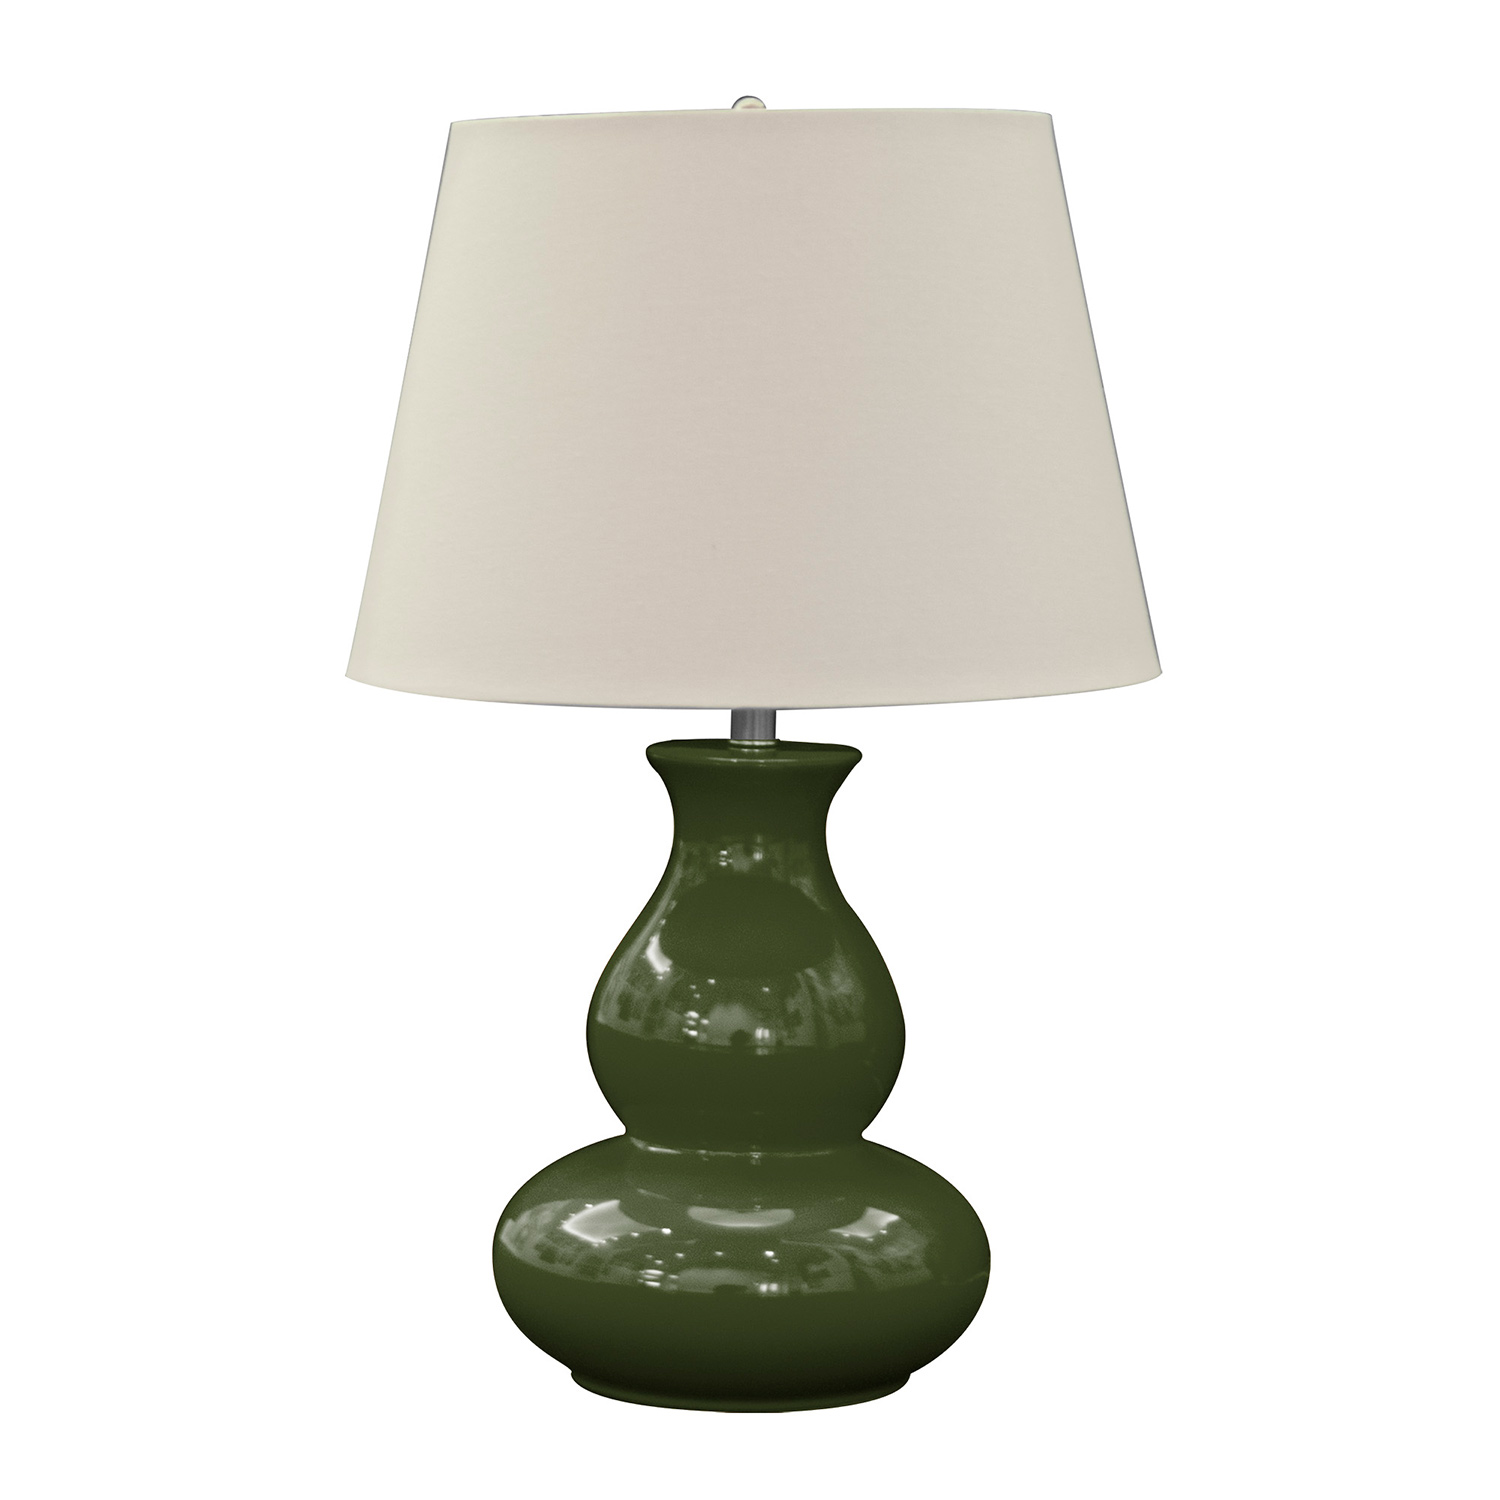 Ren-Wil Green Orchard Table Lamp - Jade Green